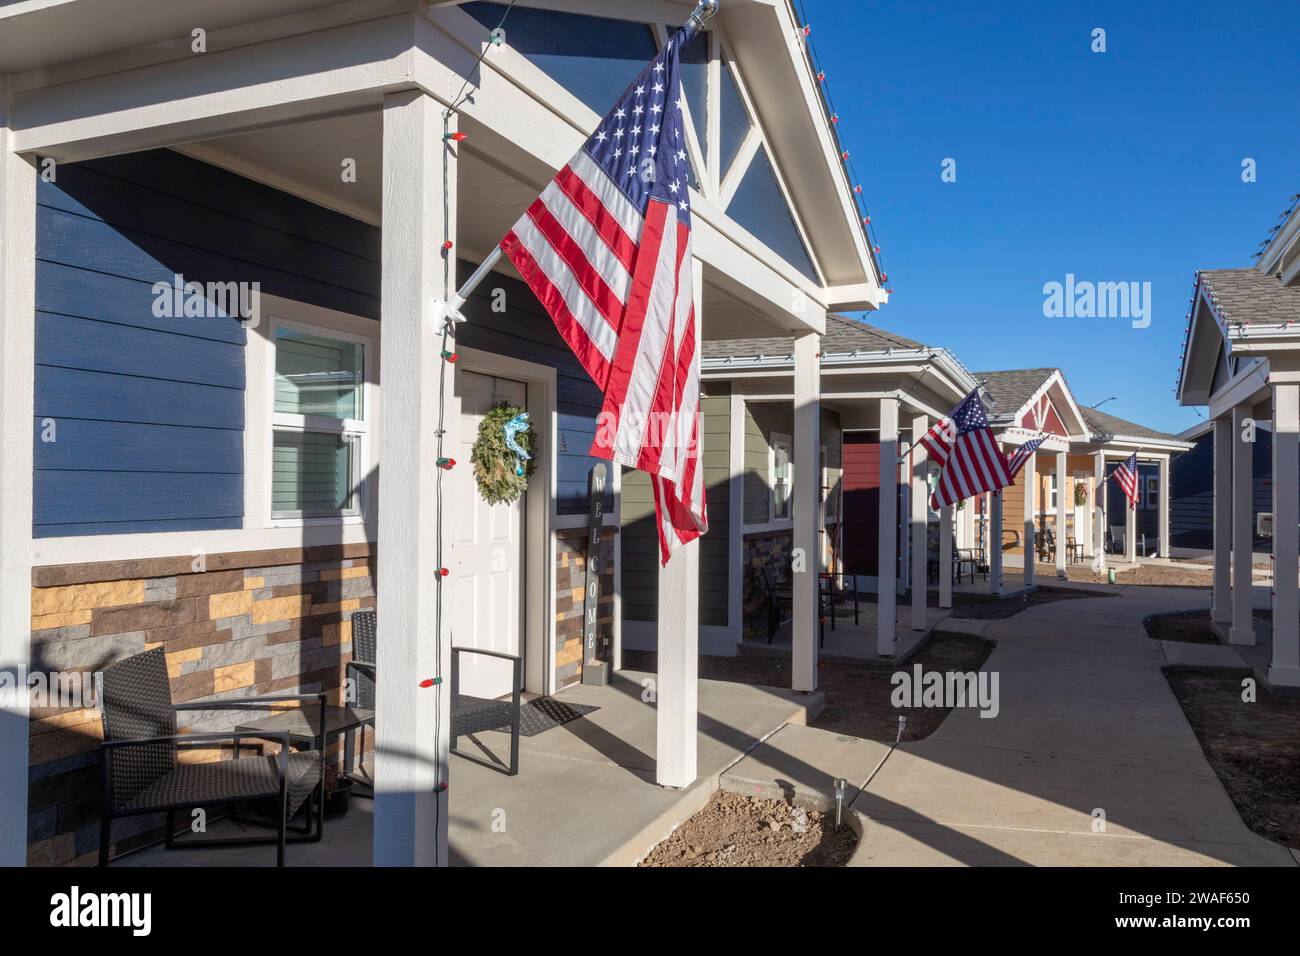 Longmont, Colorado - The Veterans Community Project is building tiny homes for homeless veterans. The development has 26 homes, ranging from 240 squar Stock Photo